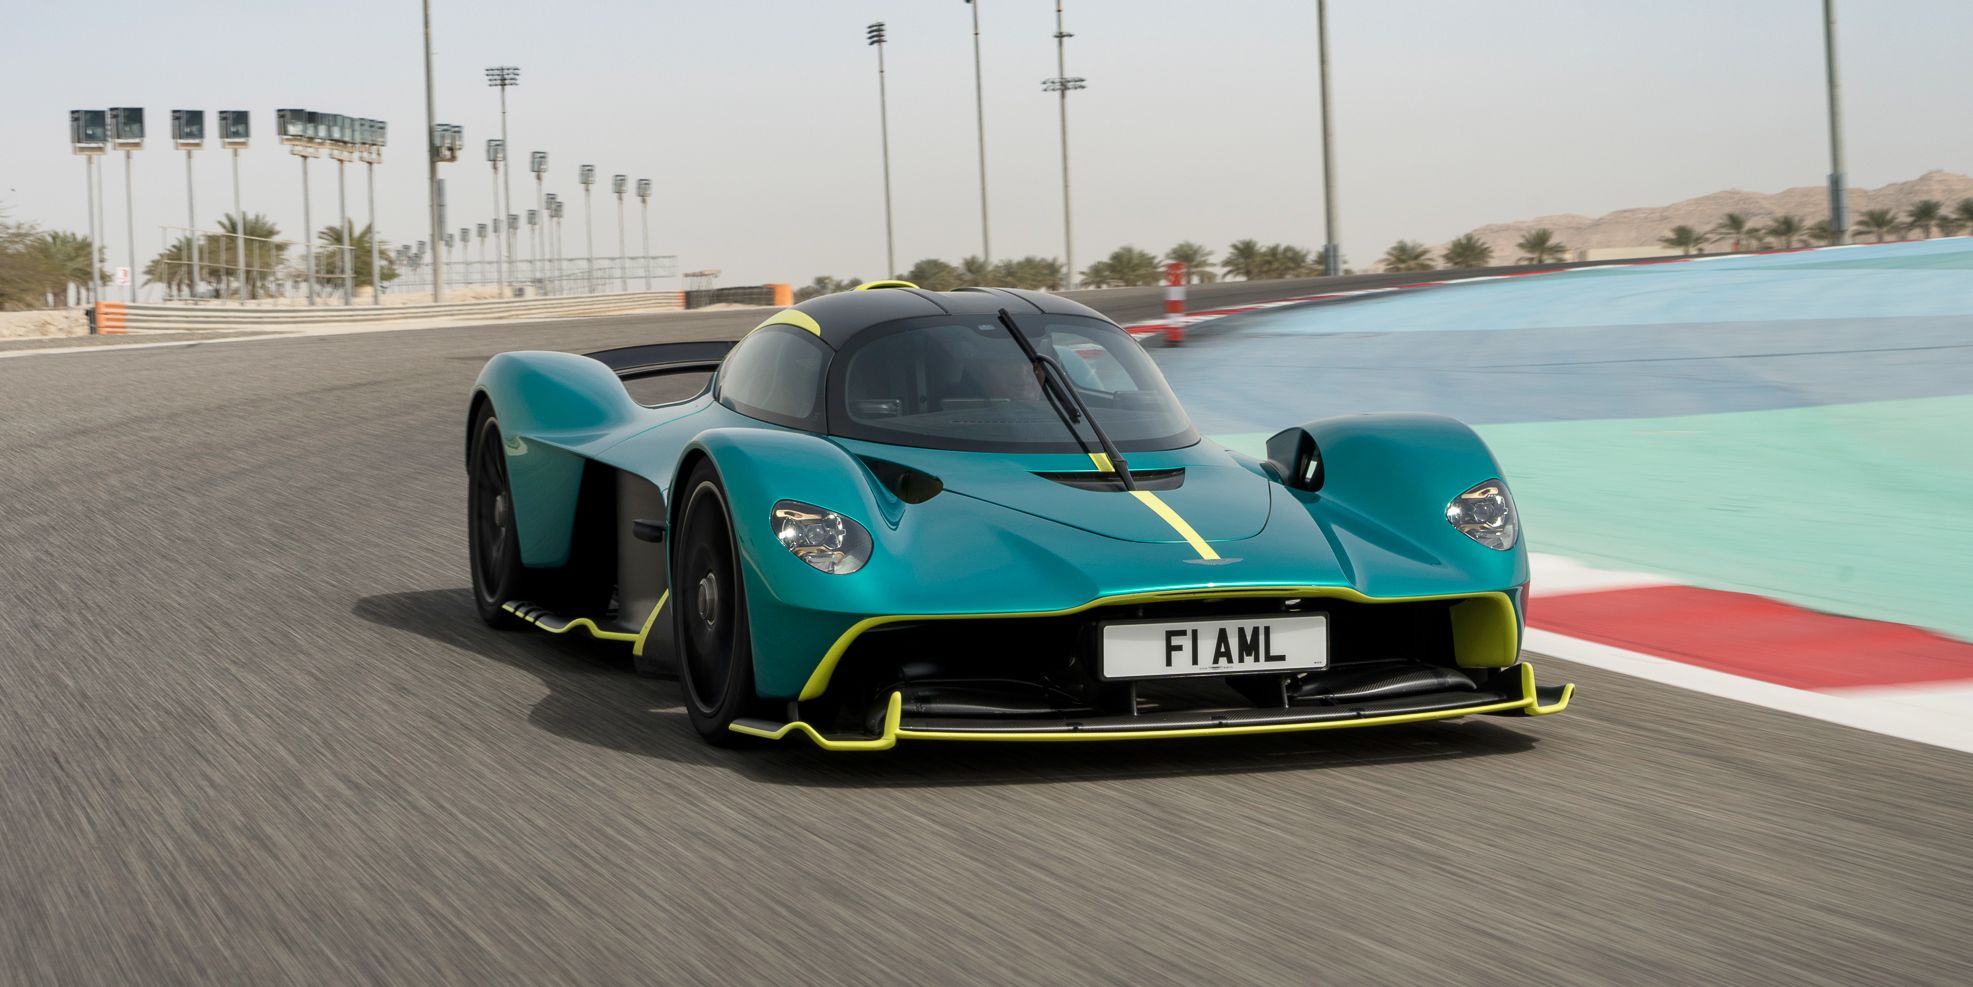 The Aston Martin Valkyrie Is the Most Extreme Car to Legally Wear License Plates